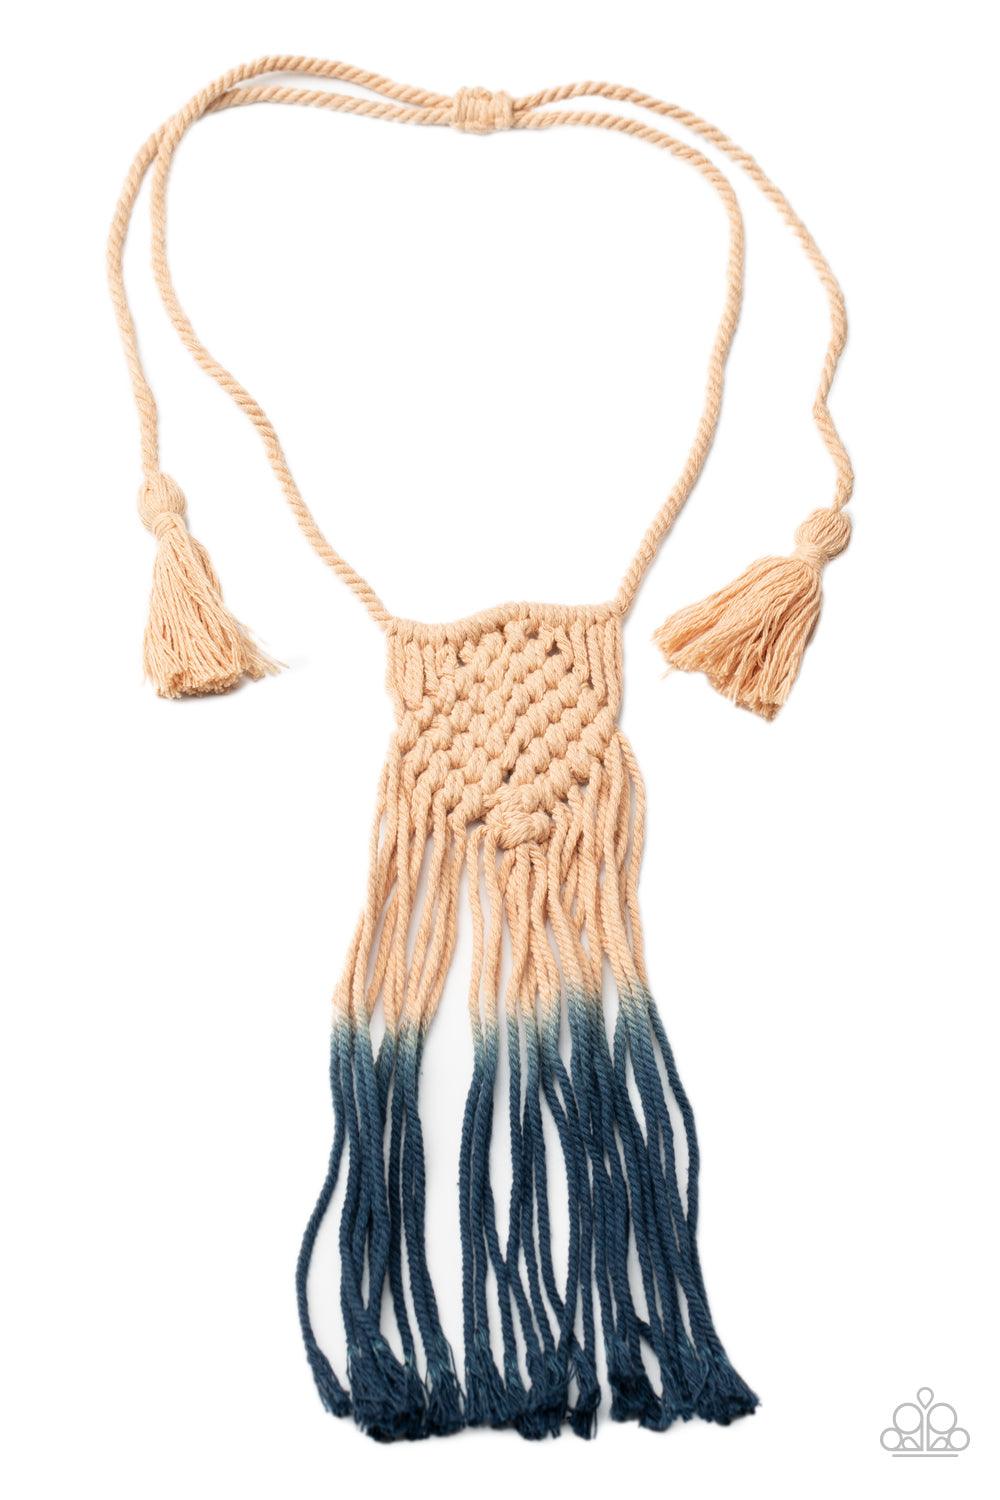 Paparazzi Accessories Look At MACRAME Now - Blue Fading from tan to Blue Depths, colorful twine-like cording delicately knots and weaves into a tasseled macramé inspired pendant across the chest. Features an adjustable sliding knot closure. Sold as one in